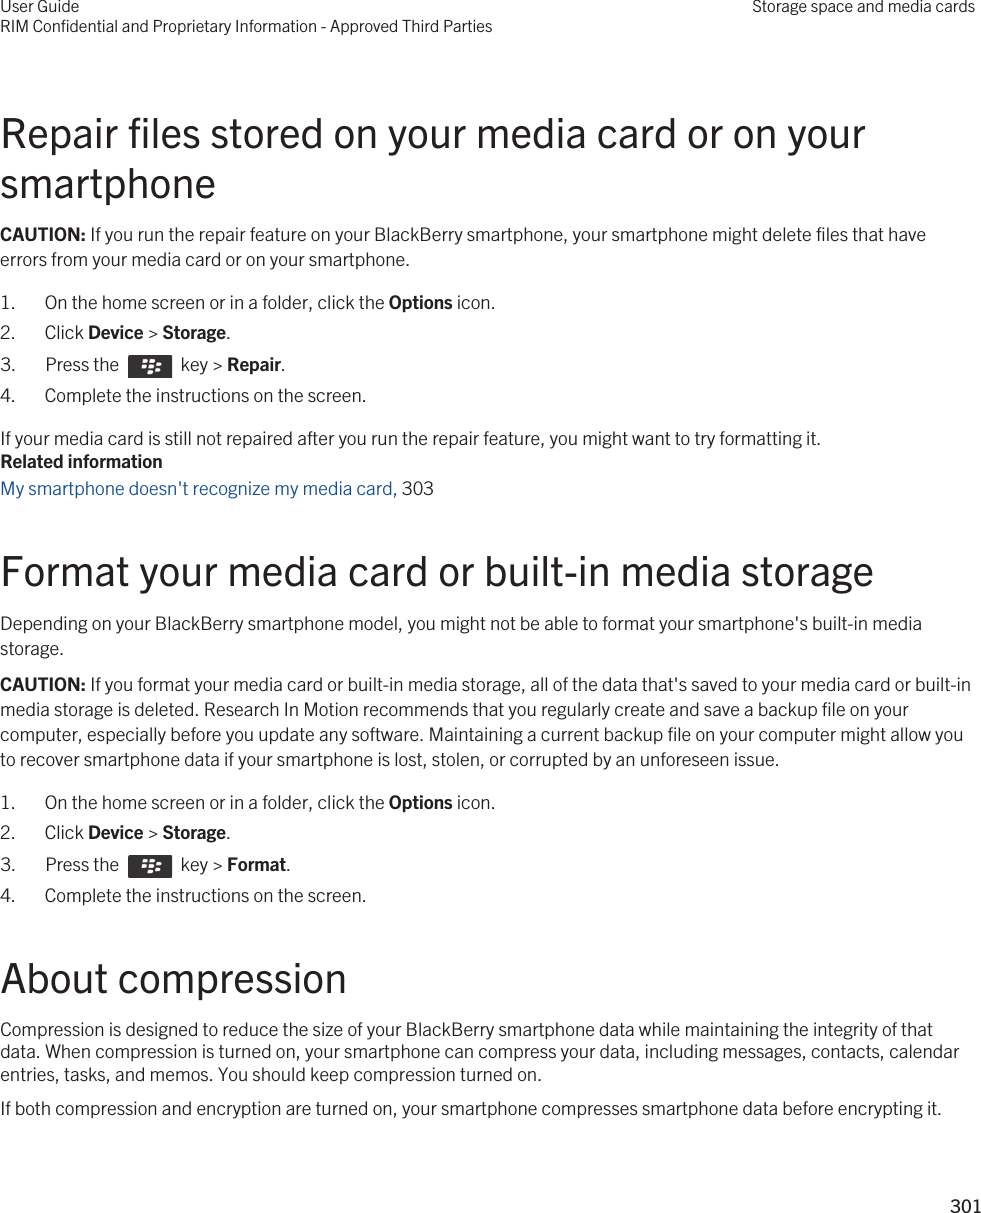 Repair files stored on your media card or on your smartphoneCAUTION: If you run the repair feature on your BlackBerry smartphone, your smartphone might delete files that have errors from your media card or on your smartphone.1. On the home screen or in a folder, click the Options icon.2. Click Device &gt; Storage.3.  Press the    key &gt; Repair. 4. Complete the instructions on the screen.If your media card is still not repaired after you run the repair feature, you might want to try formatting it.Related informationMy smartphone doesn&apos;t recognize my media card, 303Format your media card or built-in media storageDepending on your BlackBerry smartphone model, you might not be able to format your smartphone&apos;s built-in media storage.CAUTION: If you format your media card or built-in media storage, all of the data that&apos;s saved to your media card or built-in media storage is deleted. Research In Motion recommends that you regularly create and save a backup file on your computer, especially before you update any software. Maintaining a current backup file on your computer might allow you to recover smartphone data if your smartphone is lost, stolen, or corrupted by an unforeseen issue.1. On the home screen or in a folder, click the Options icon.2. Click Device &gt; Storage.3.  Press the    key &gt; Format. 4. Complete the instructions on the screen.About compressionCompression is designed to reduce the size of your BlackBerry smartphone data while maintaining the integrity of that data. When compression is turned on, your smartphone can compress your data, including messages, contacts, calendar entries, tasks, and memos. You should keep compression turned on.If both compression and encryption are turned on, your smartphone compresses smartphone data before encrypting it.User GuideRIM Confidential and Proprietary Information - Approved Third PartiesStorage space and media cards301 